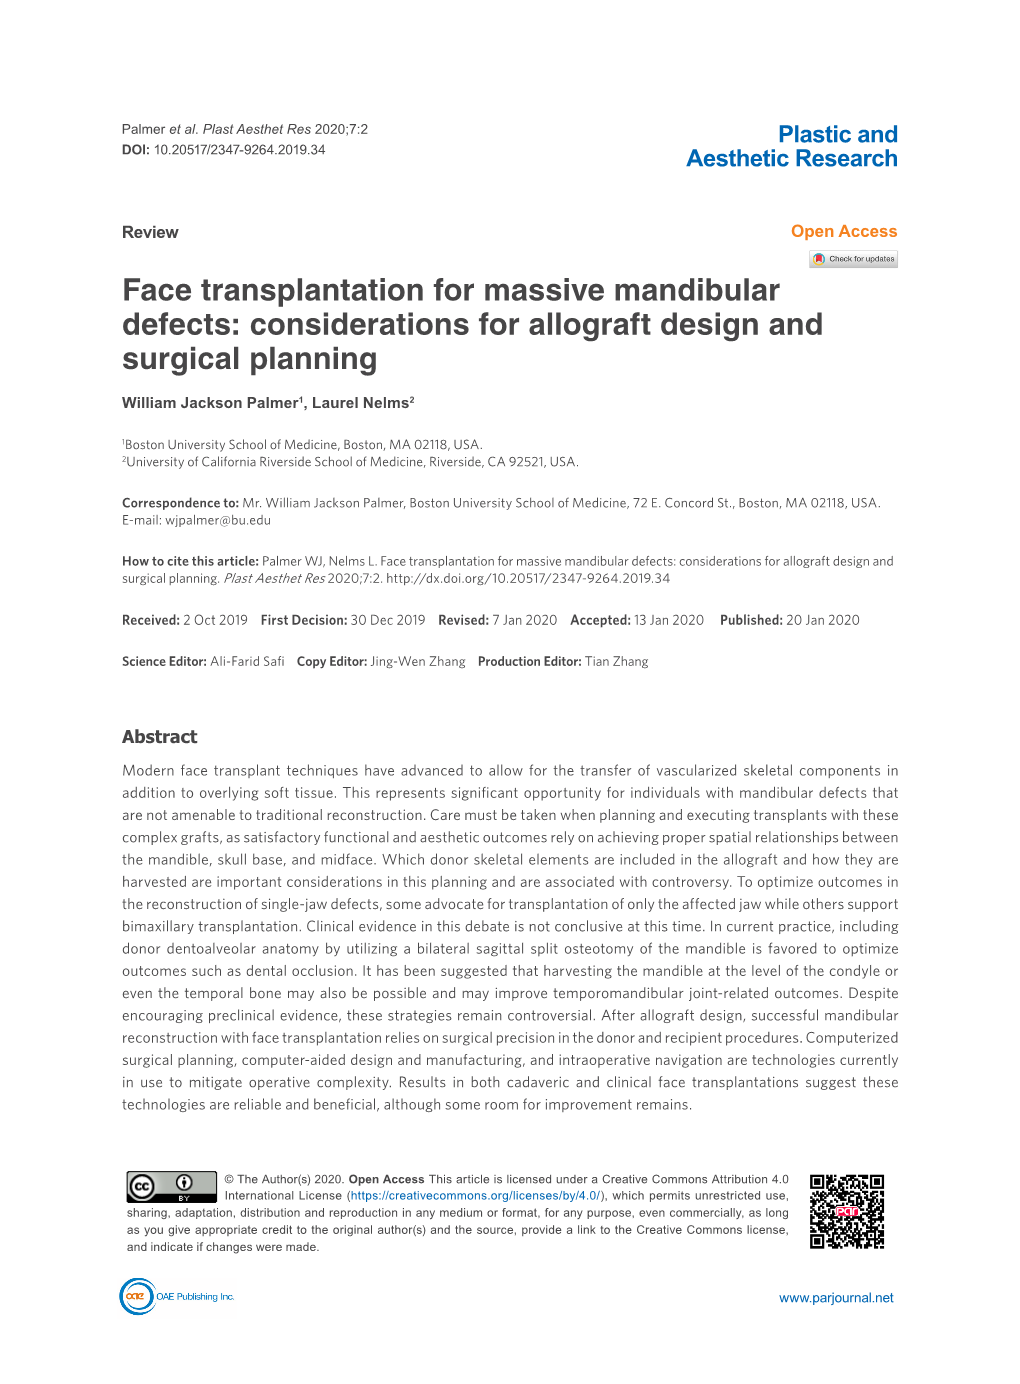 Face Transplantation for Massive Mandibular Defects: Considerations for Allograft Design and Surgical Planning